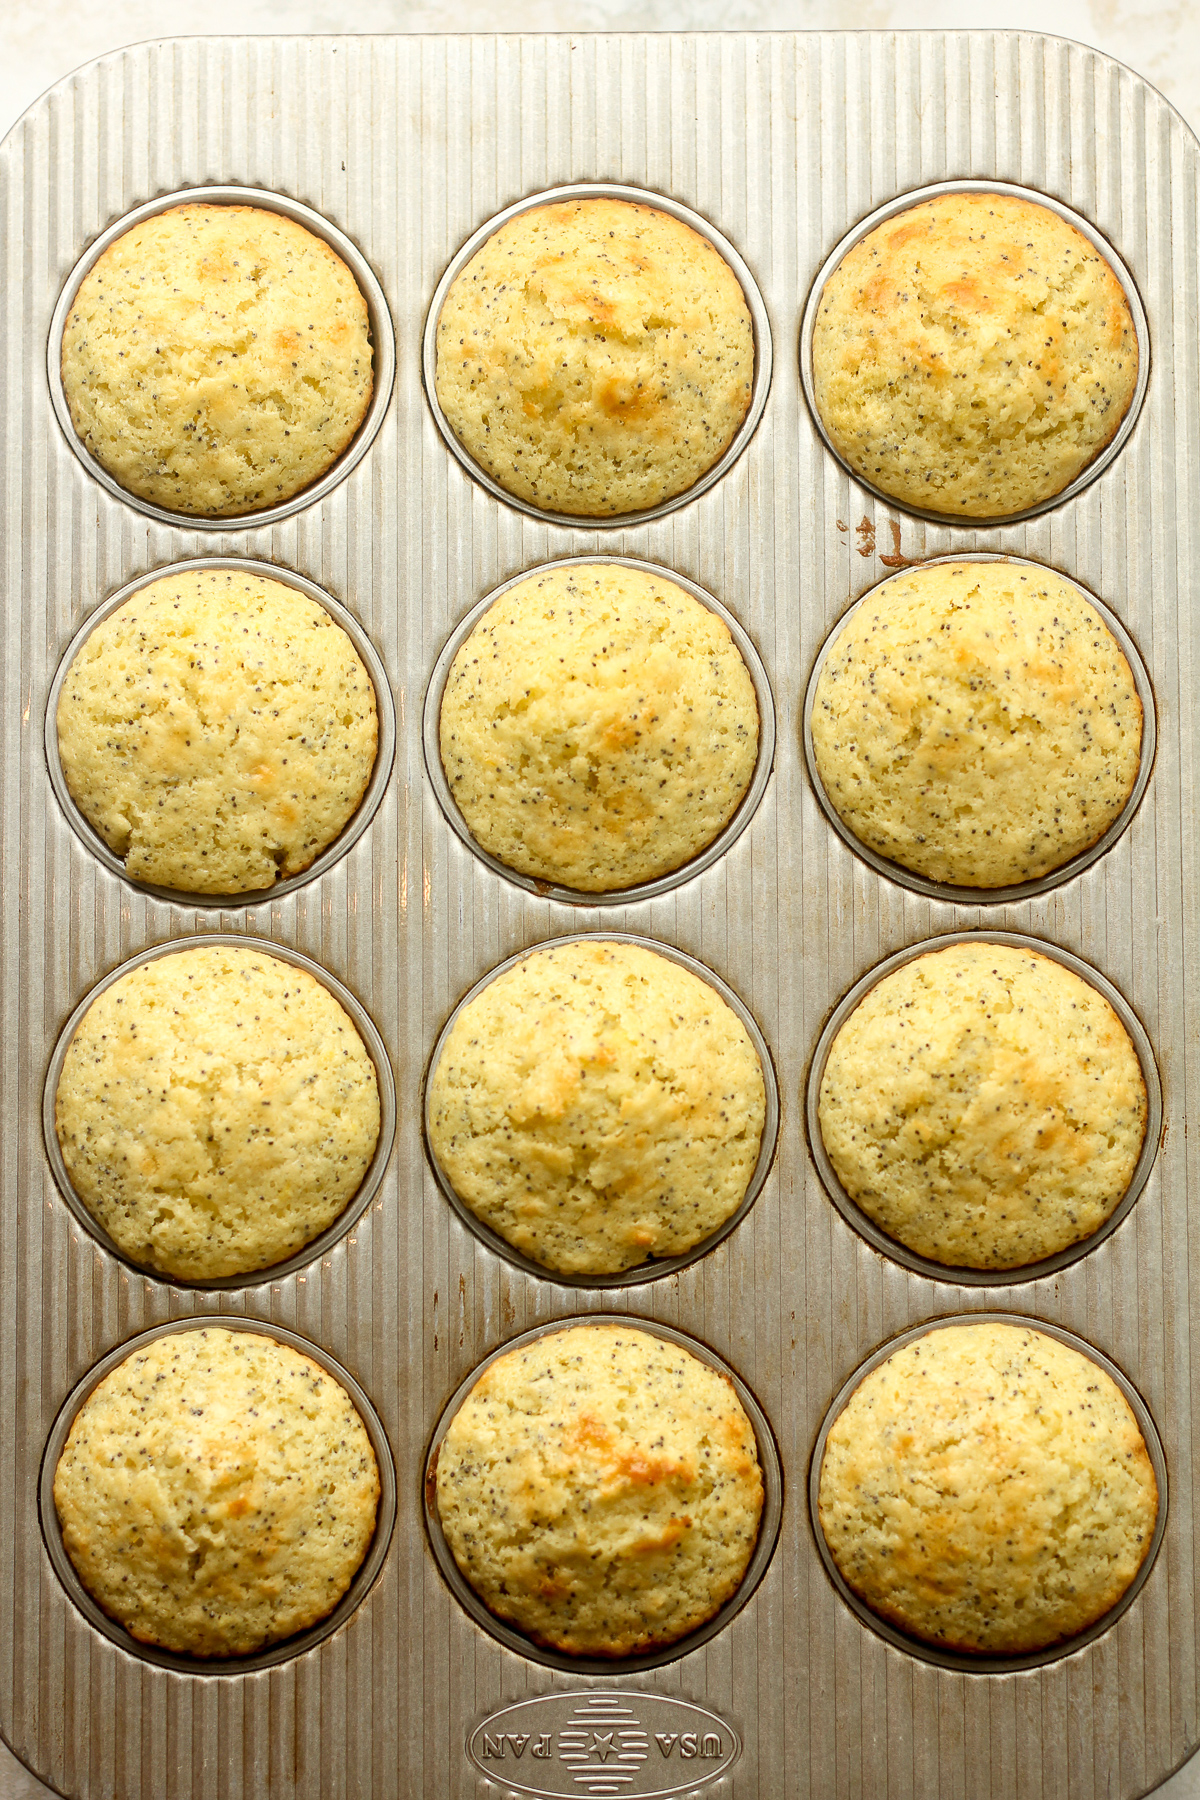 The just baked lemon muffins in a muffin tin.